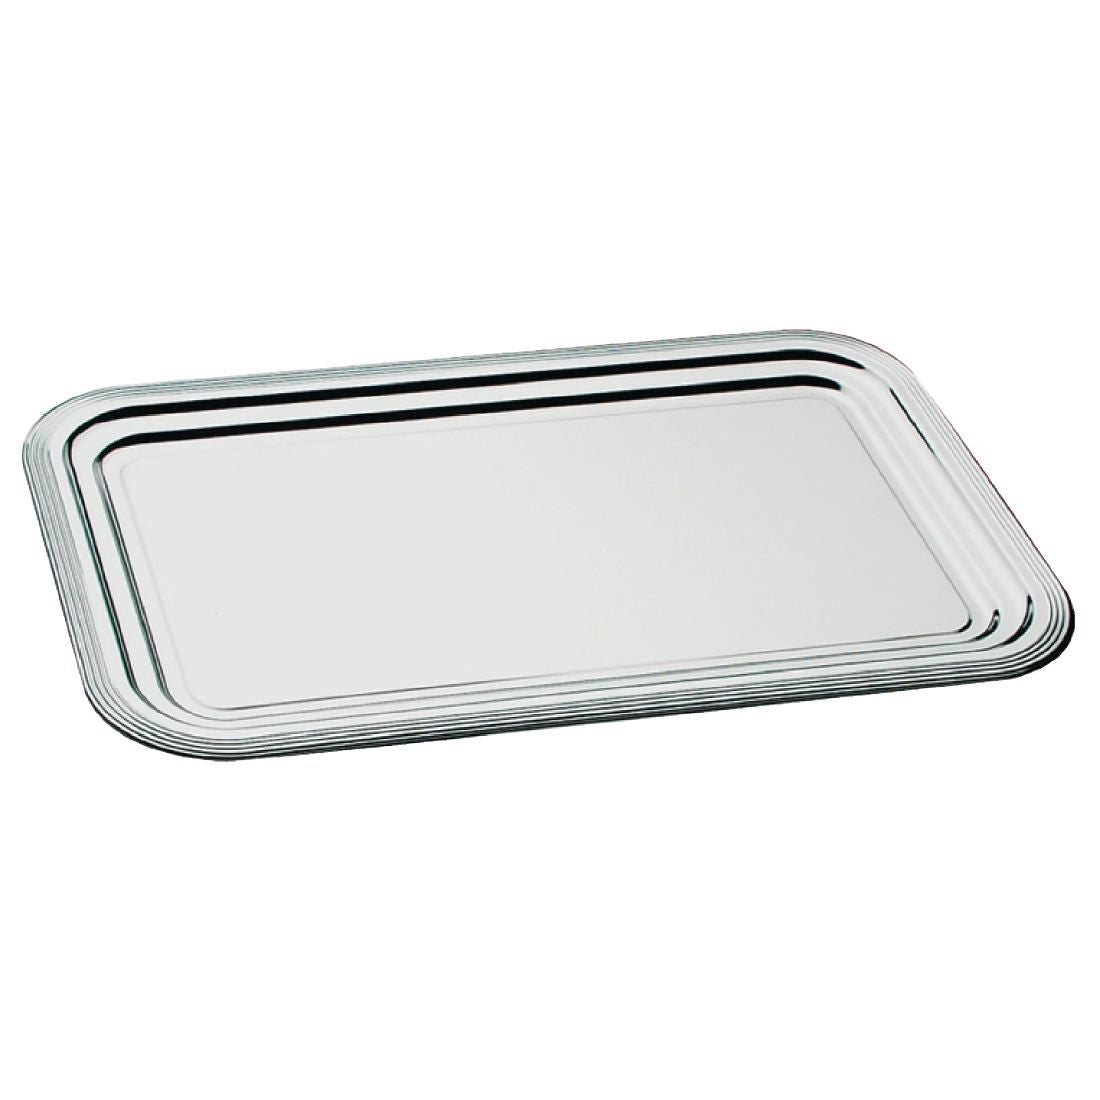 APS Semi-Disposable Party Tray GN 1/1 Chrome JD Catering Equipment Solutions Ltd